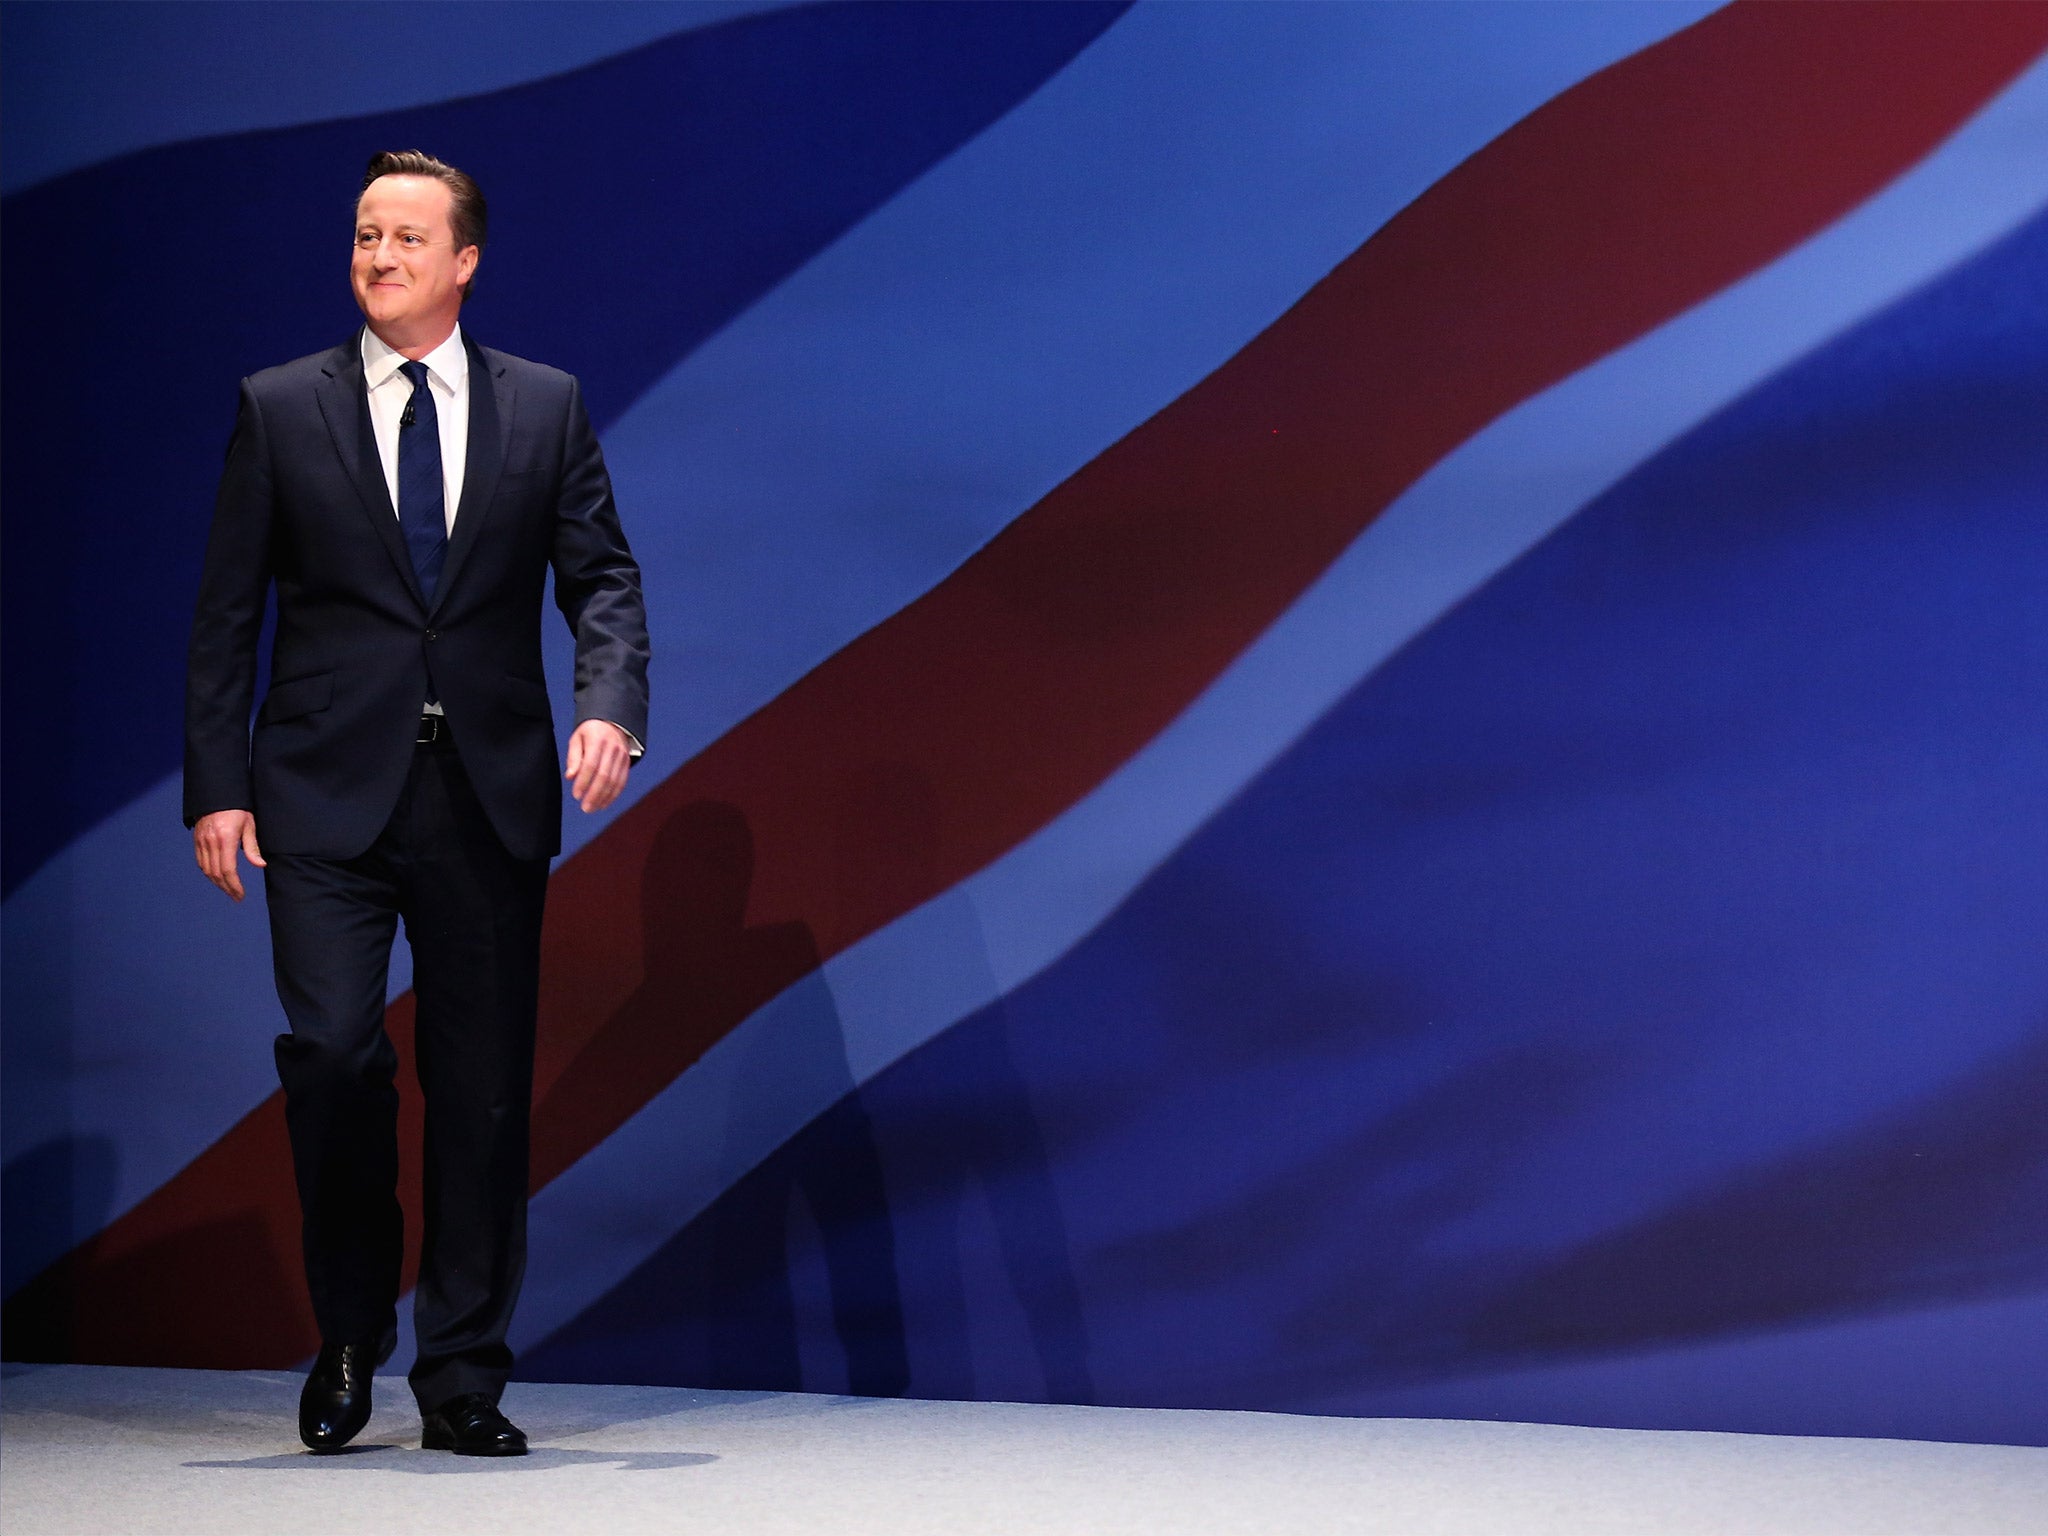 Hooker or left-winger?: Cameron takes to the stage in Manchester